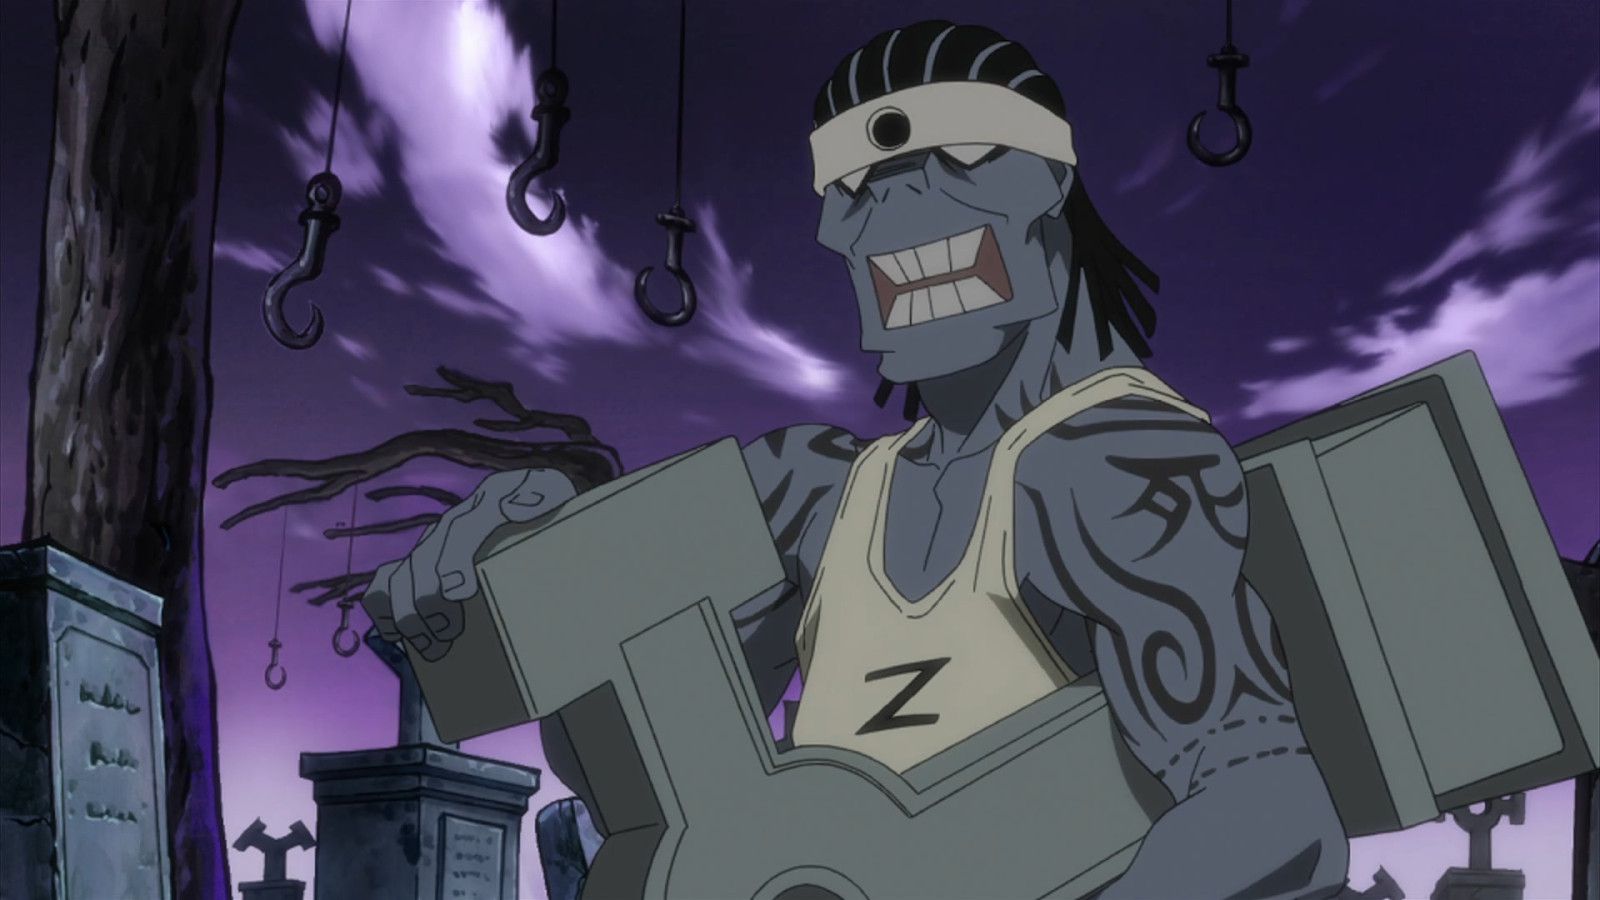 Zombie character in Sou Eater anime